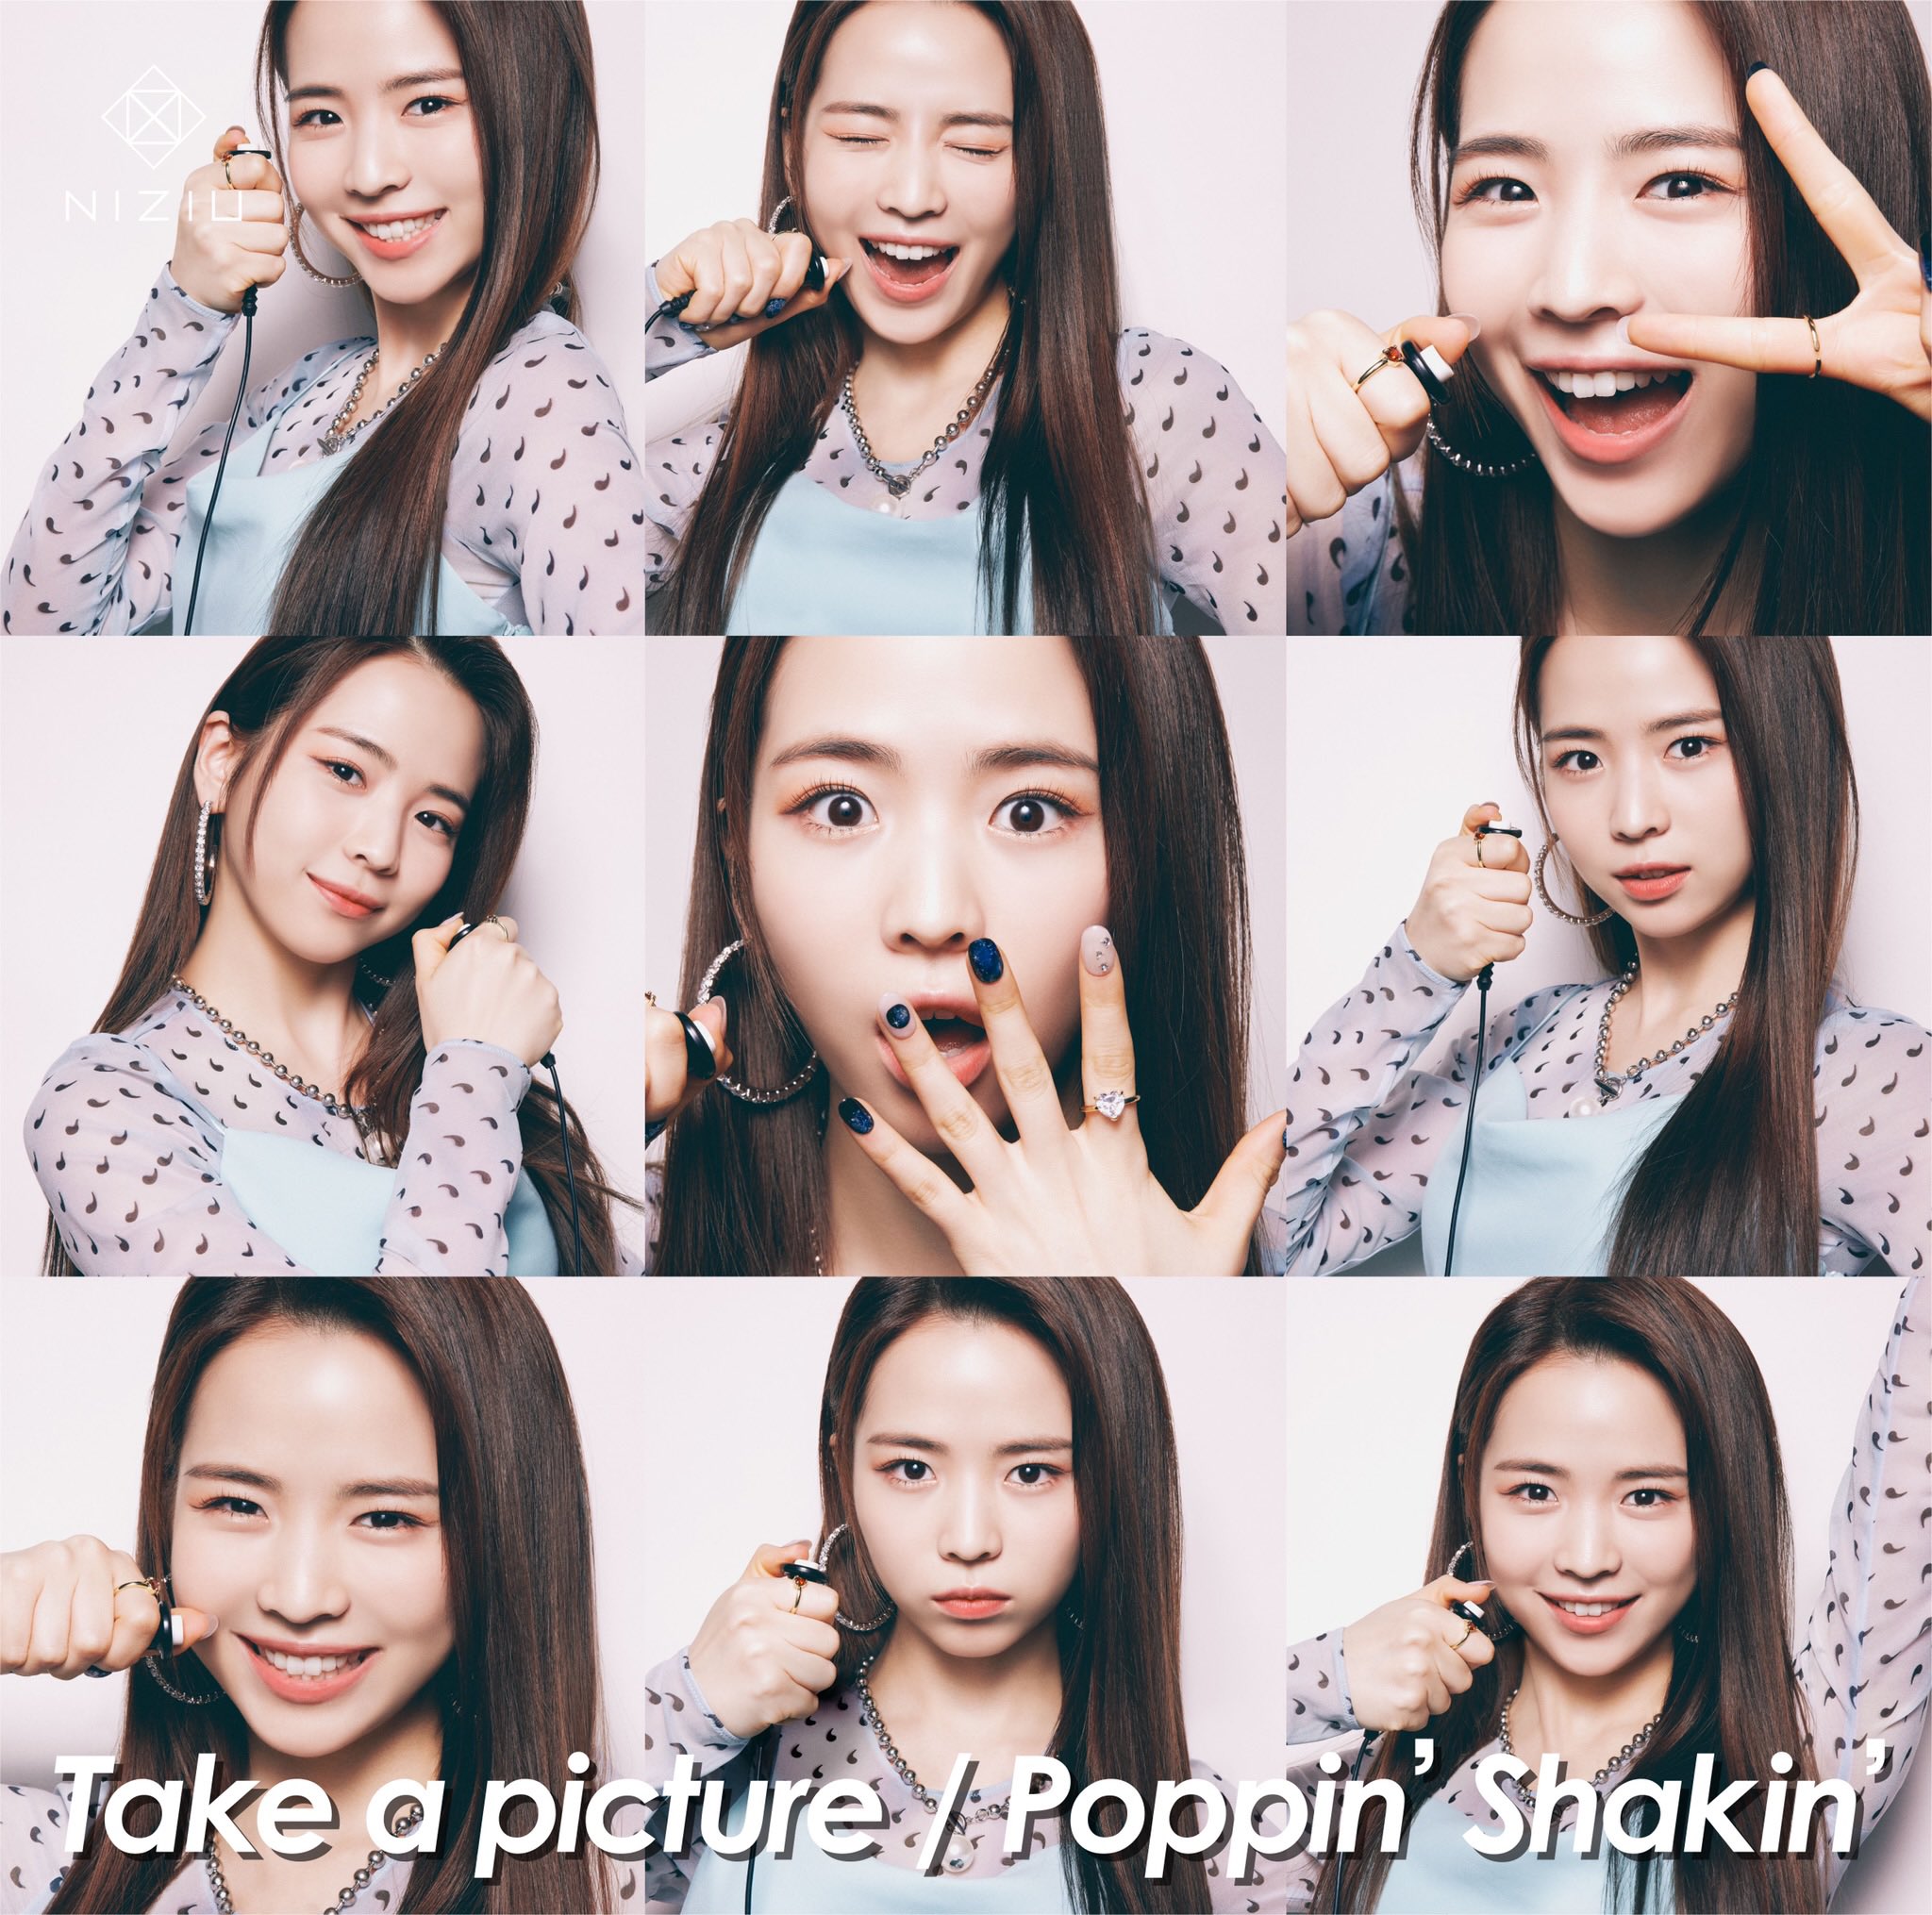 Take a picture Poppin' Shakin' リマ ver - 邦楽